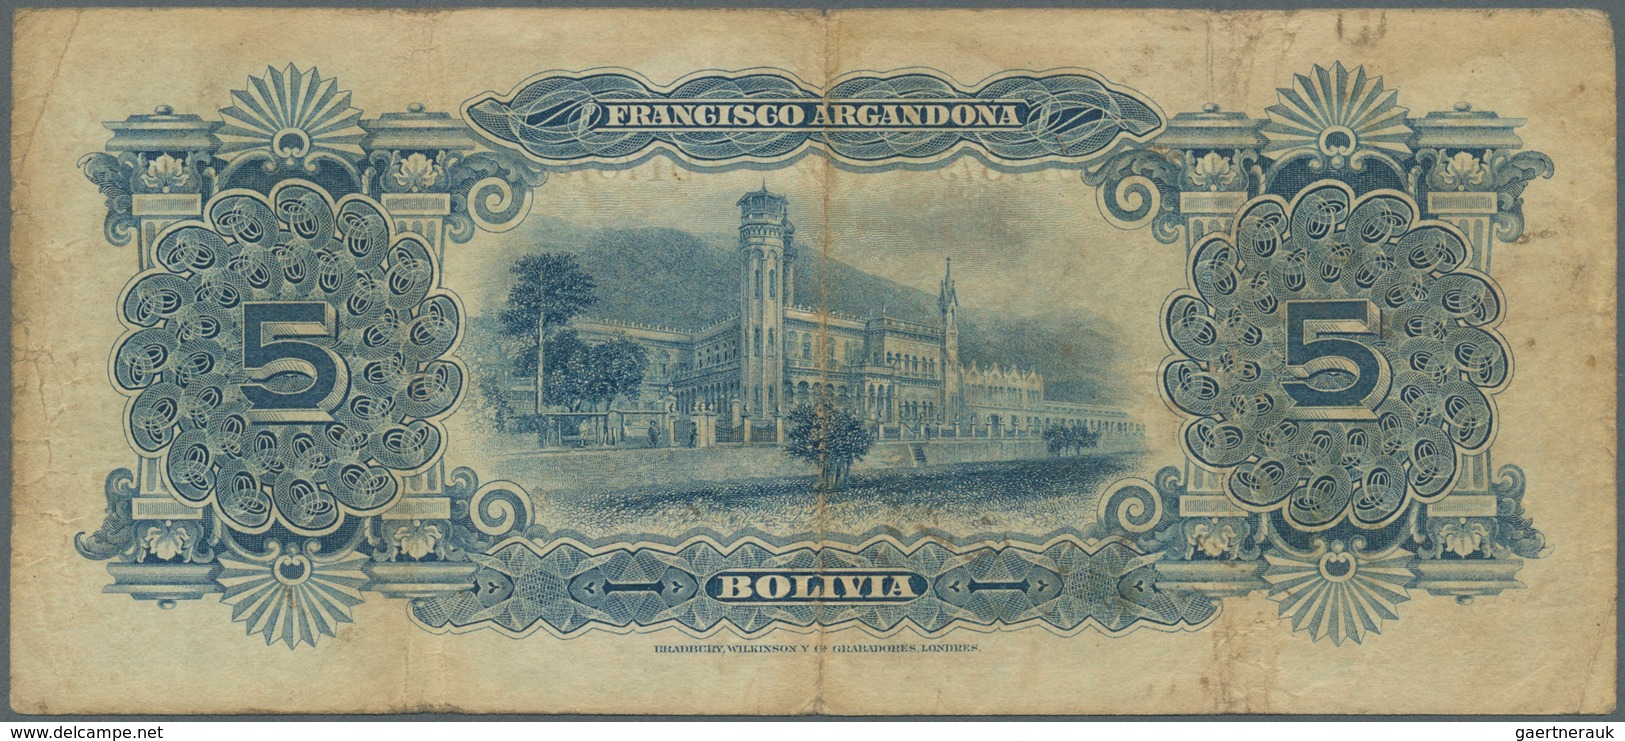 01148 Bolivia / Bolivien:  Banco Francisco Argandoña 5 Bolivianos 1907, P.S150, Lightly Stained Paper With - Bolivië